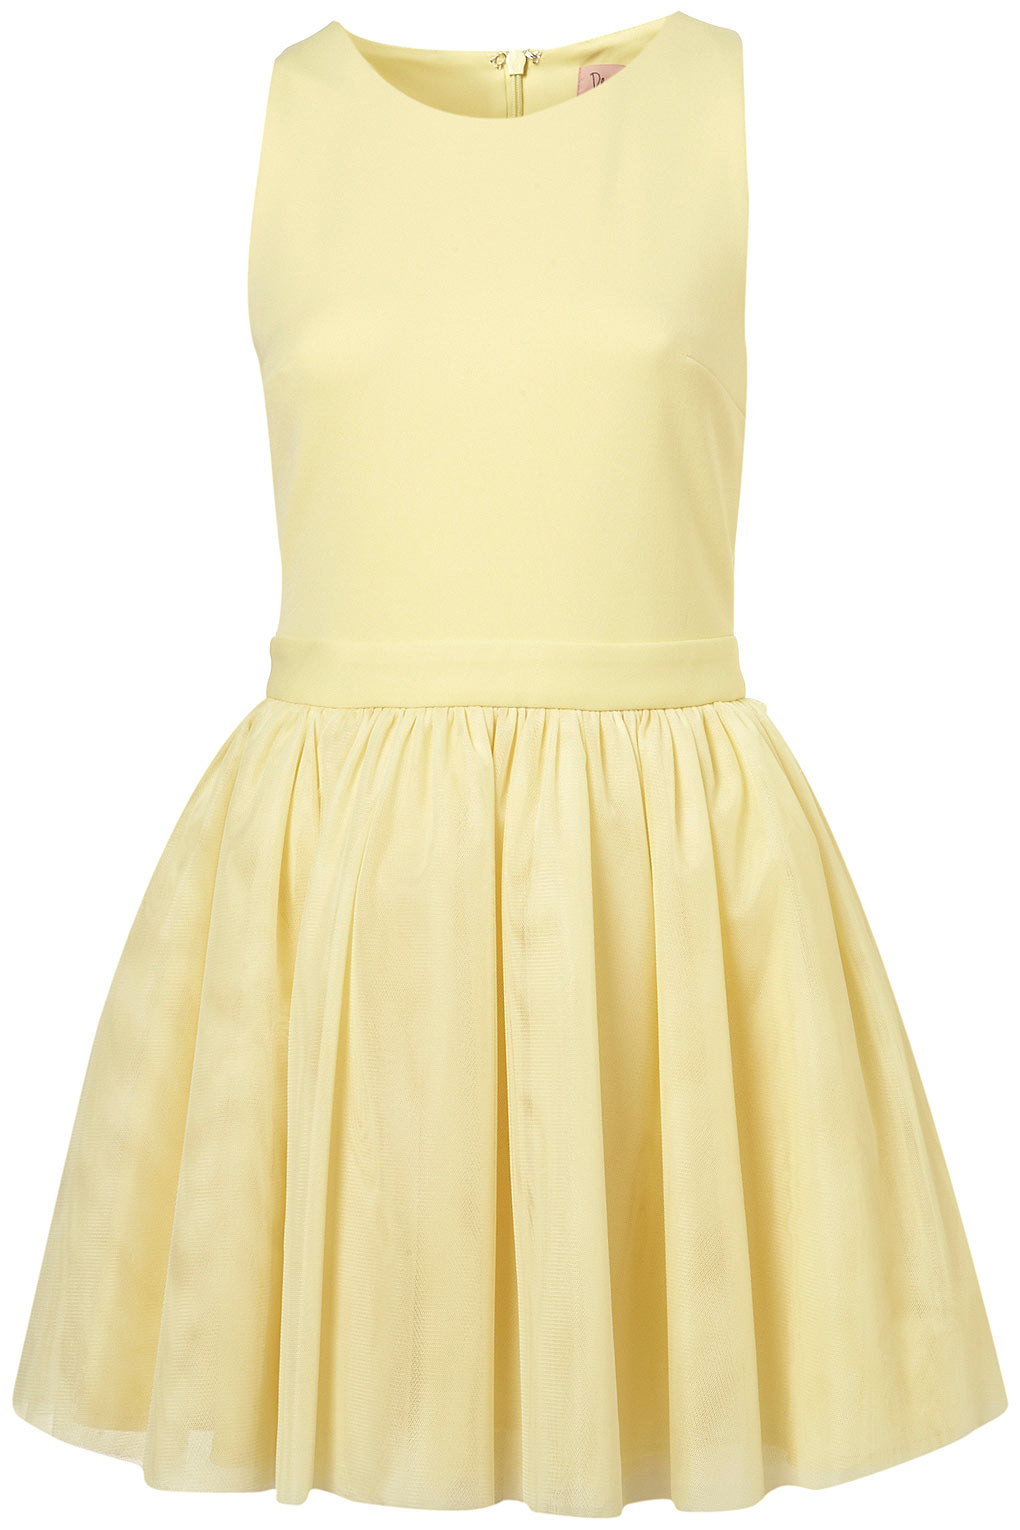 Topshop Lemon Tulle Skirt Dress By Dress Up Topshop in Yellow | Lyst